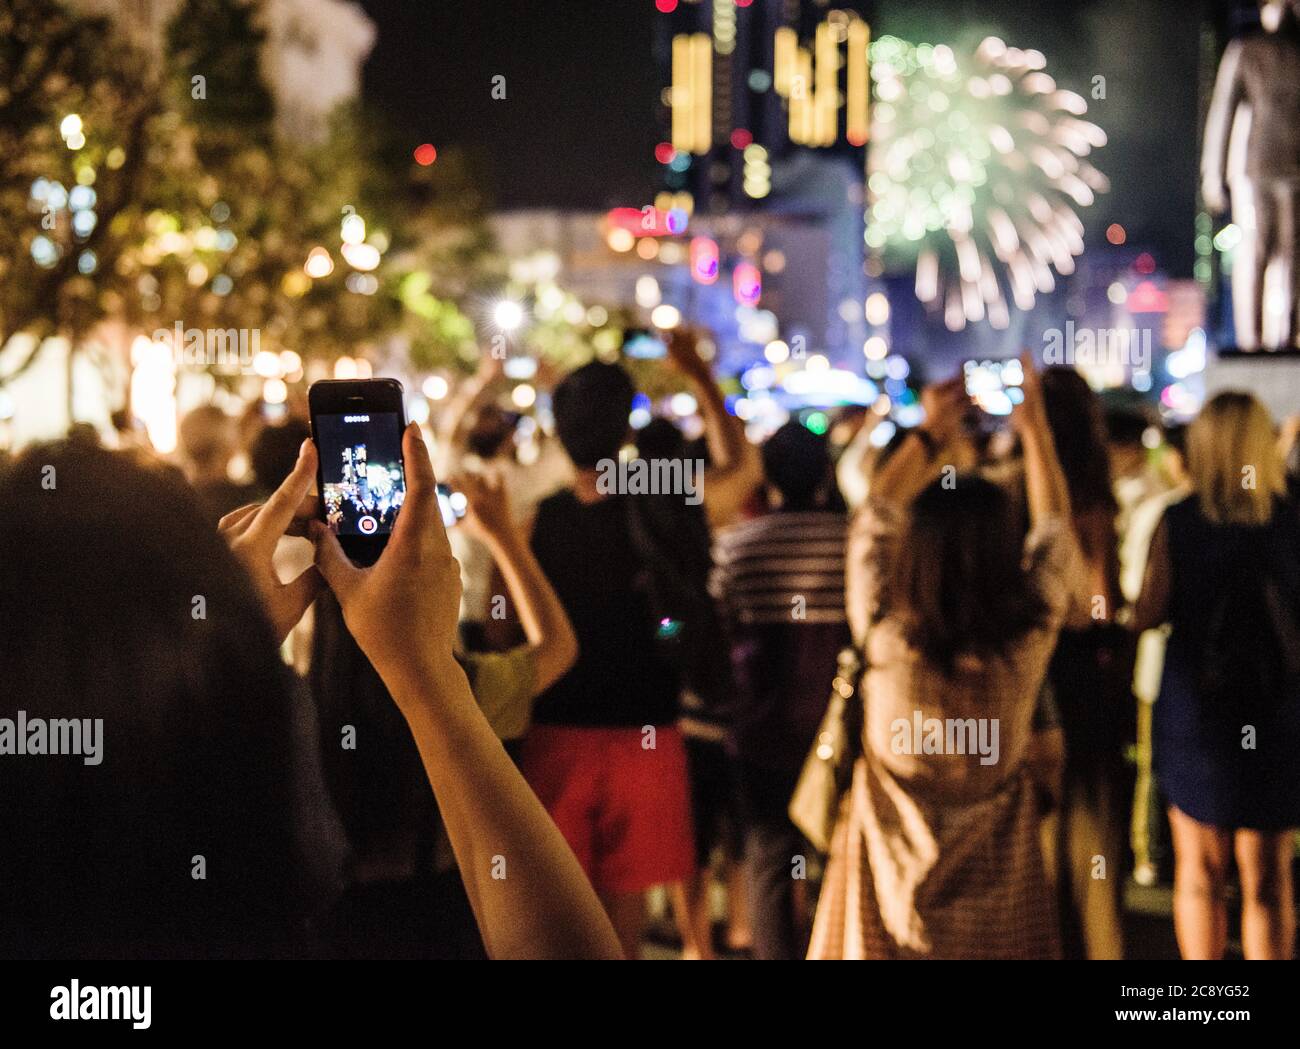 People taking pictures of fireworks with their phones, Ho Chi Minh City, Vietnam Stock Photo